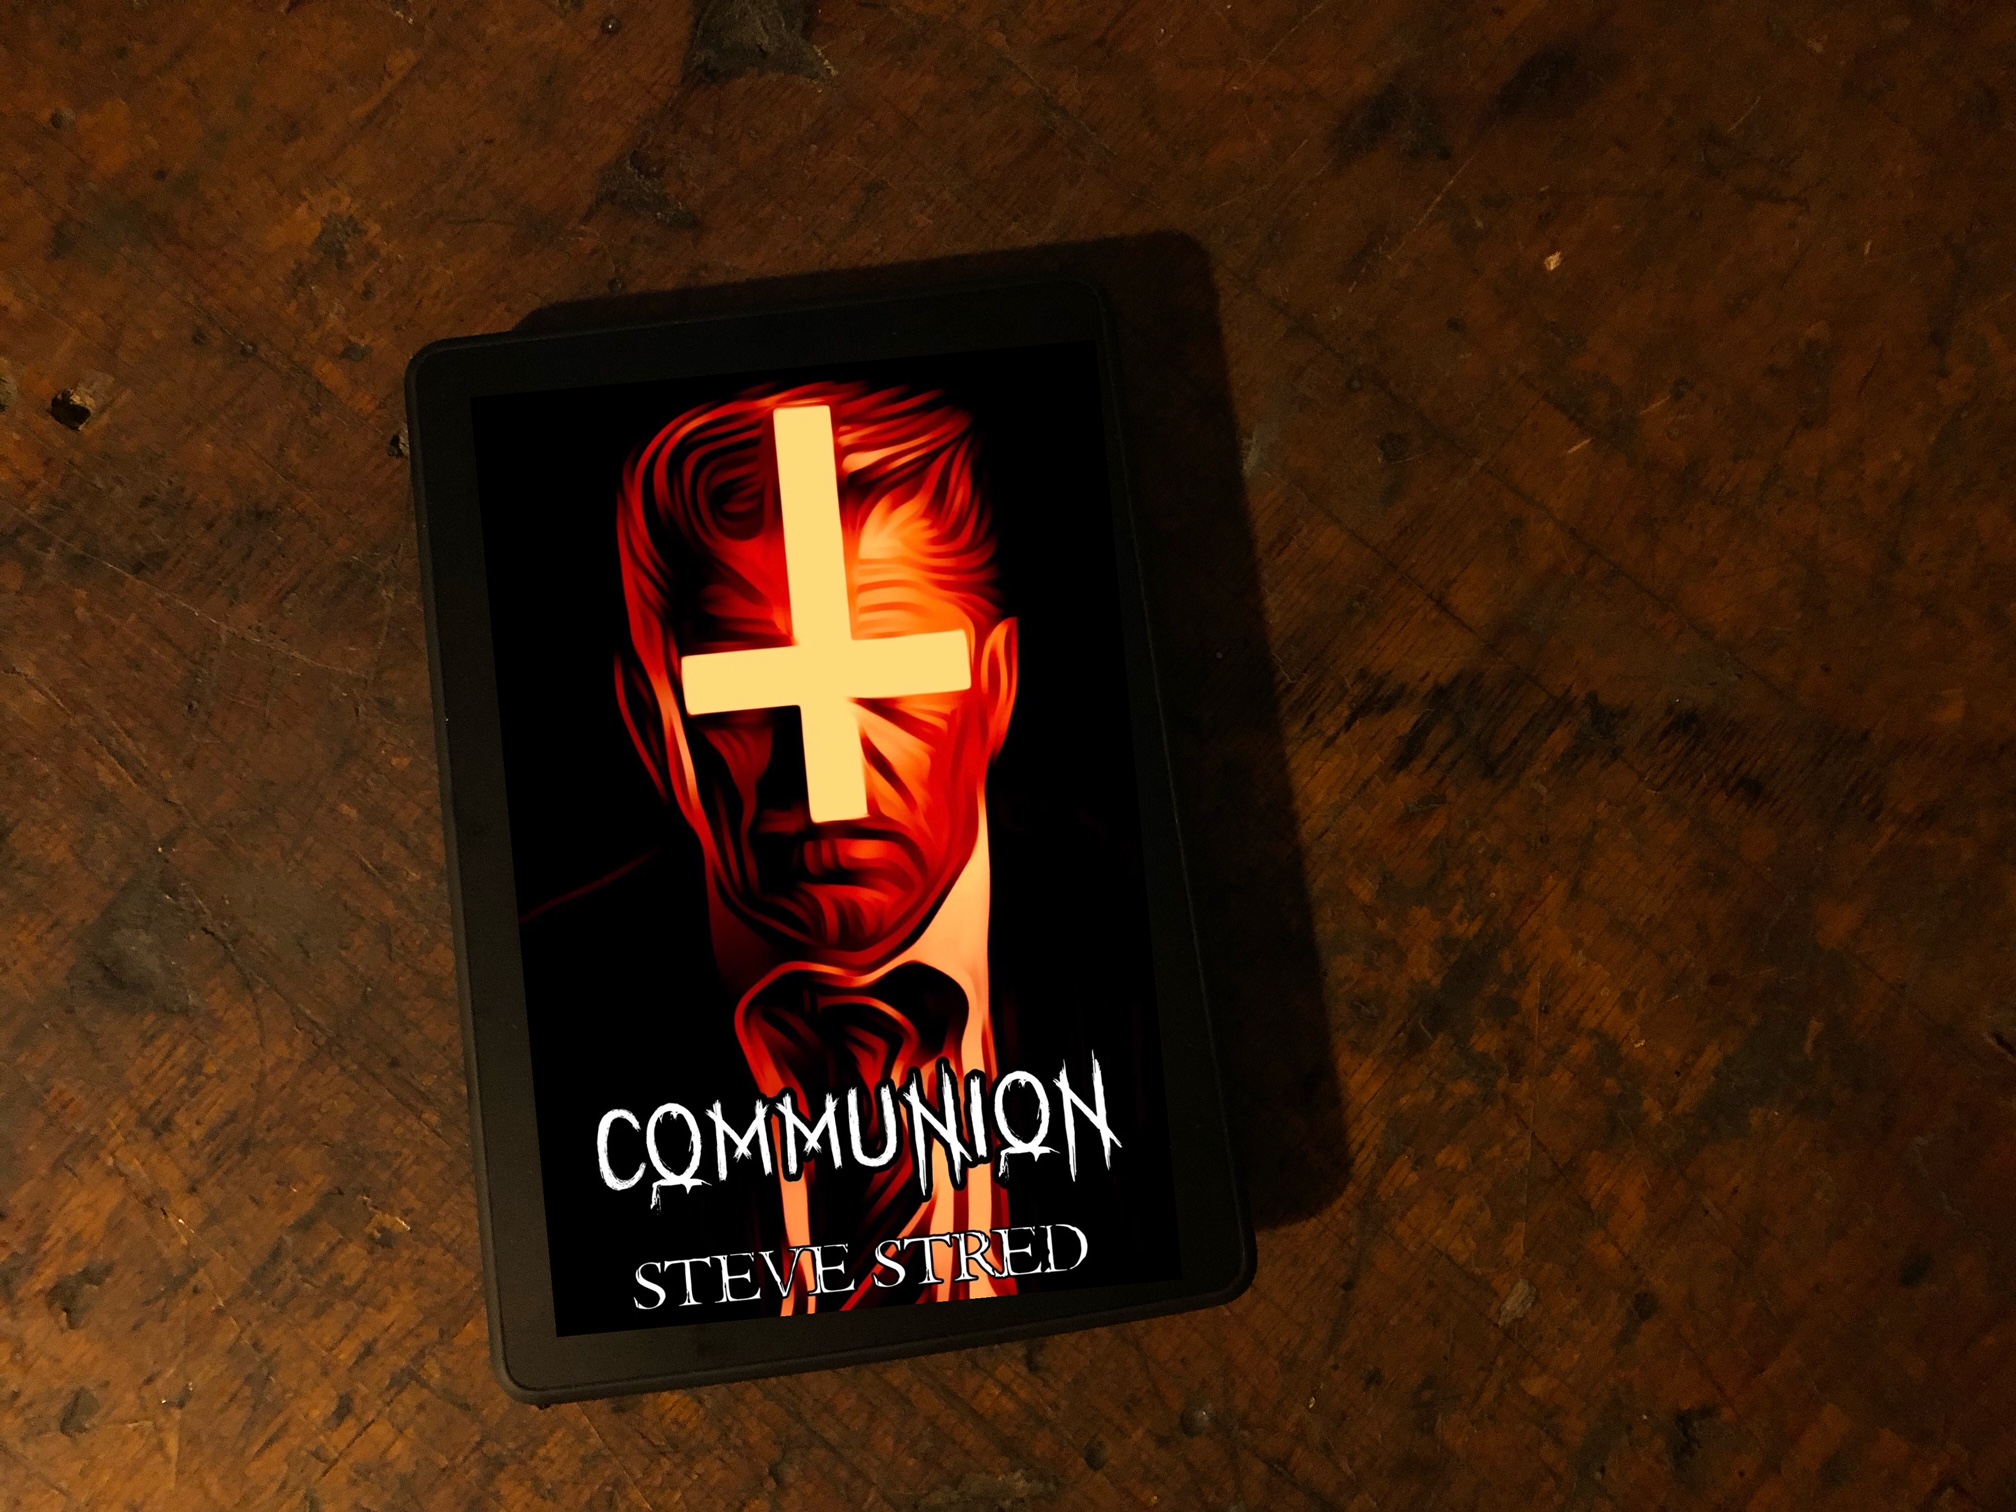 Communion by Steve Stred book photo by Erica Robyn Reads